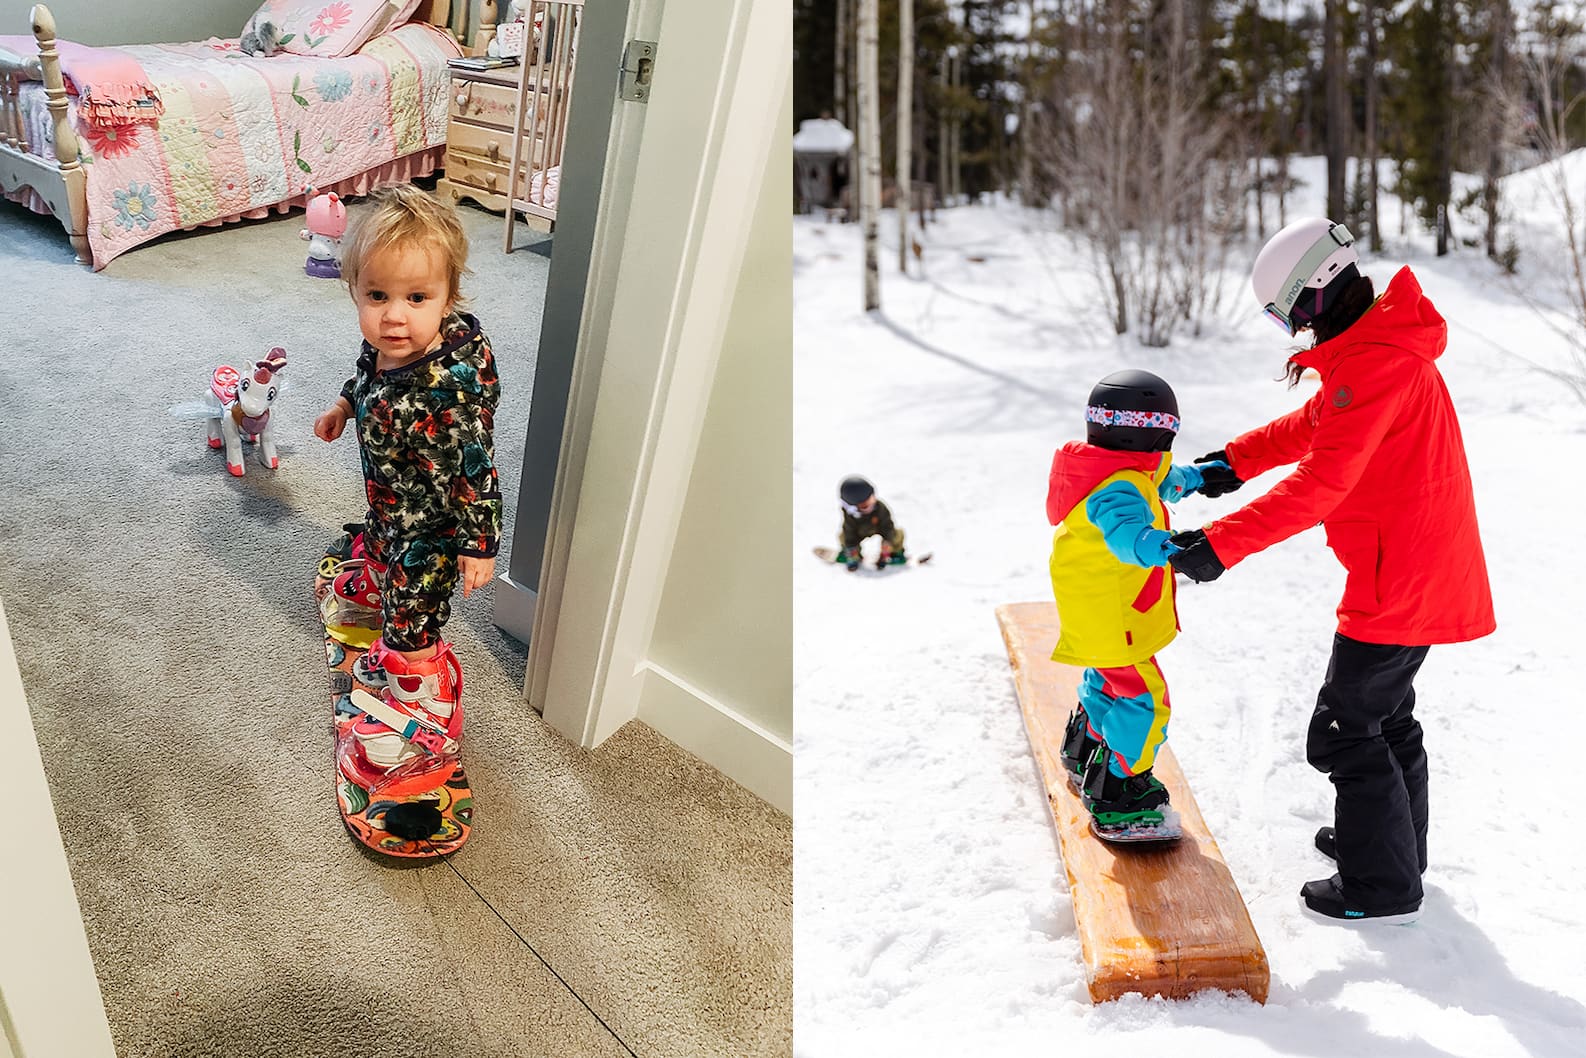 Getting Started: Teaching Kids to Snowboard